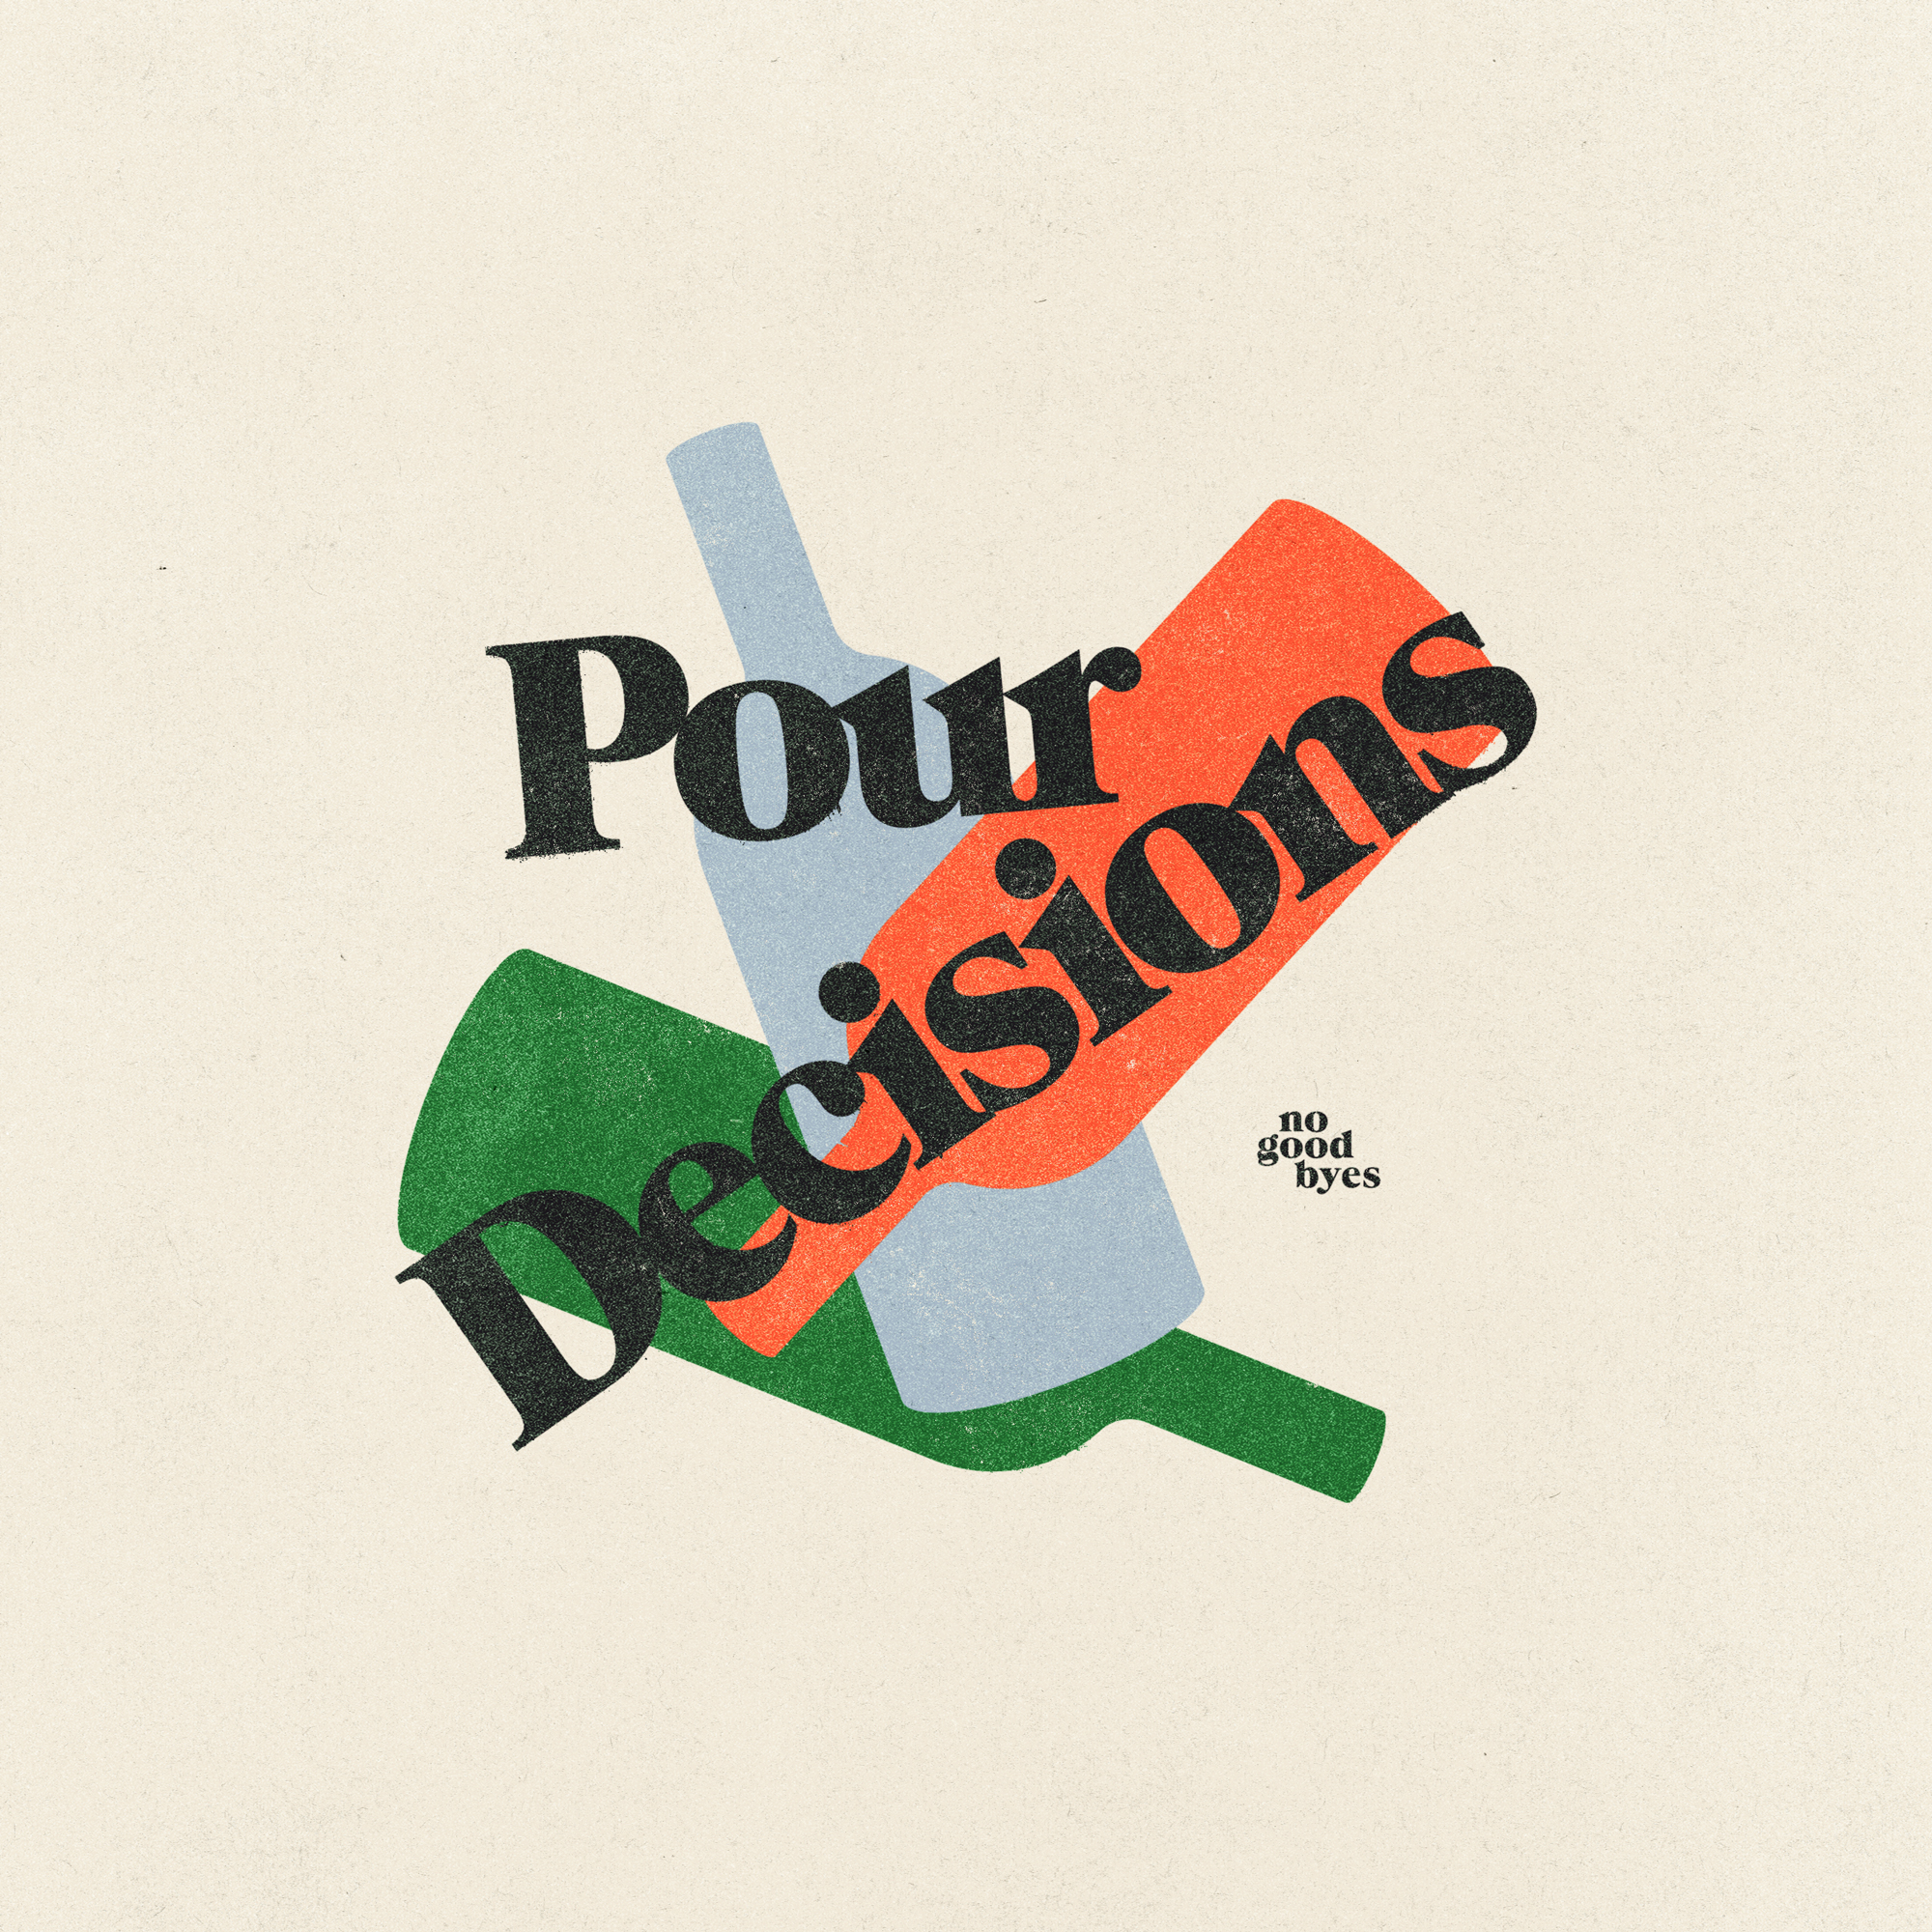 A brochure from "POUR DECISIONS" featuring an image and accompanying text.